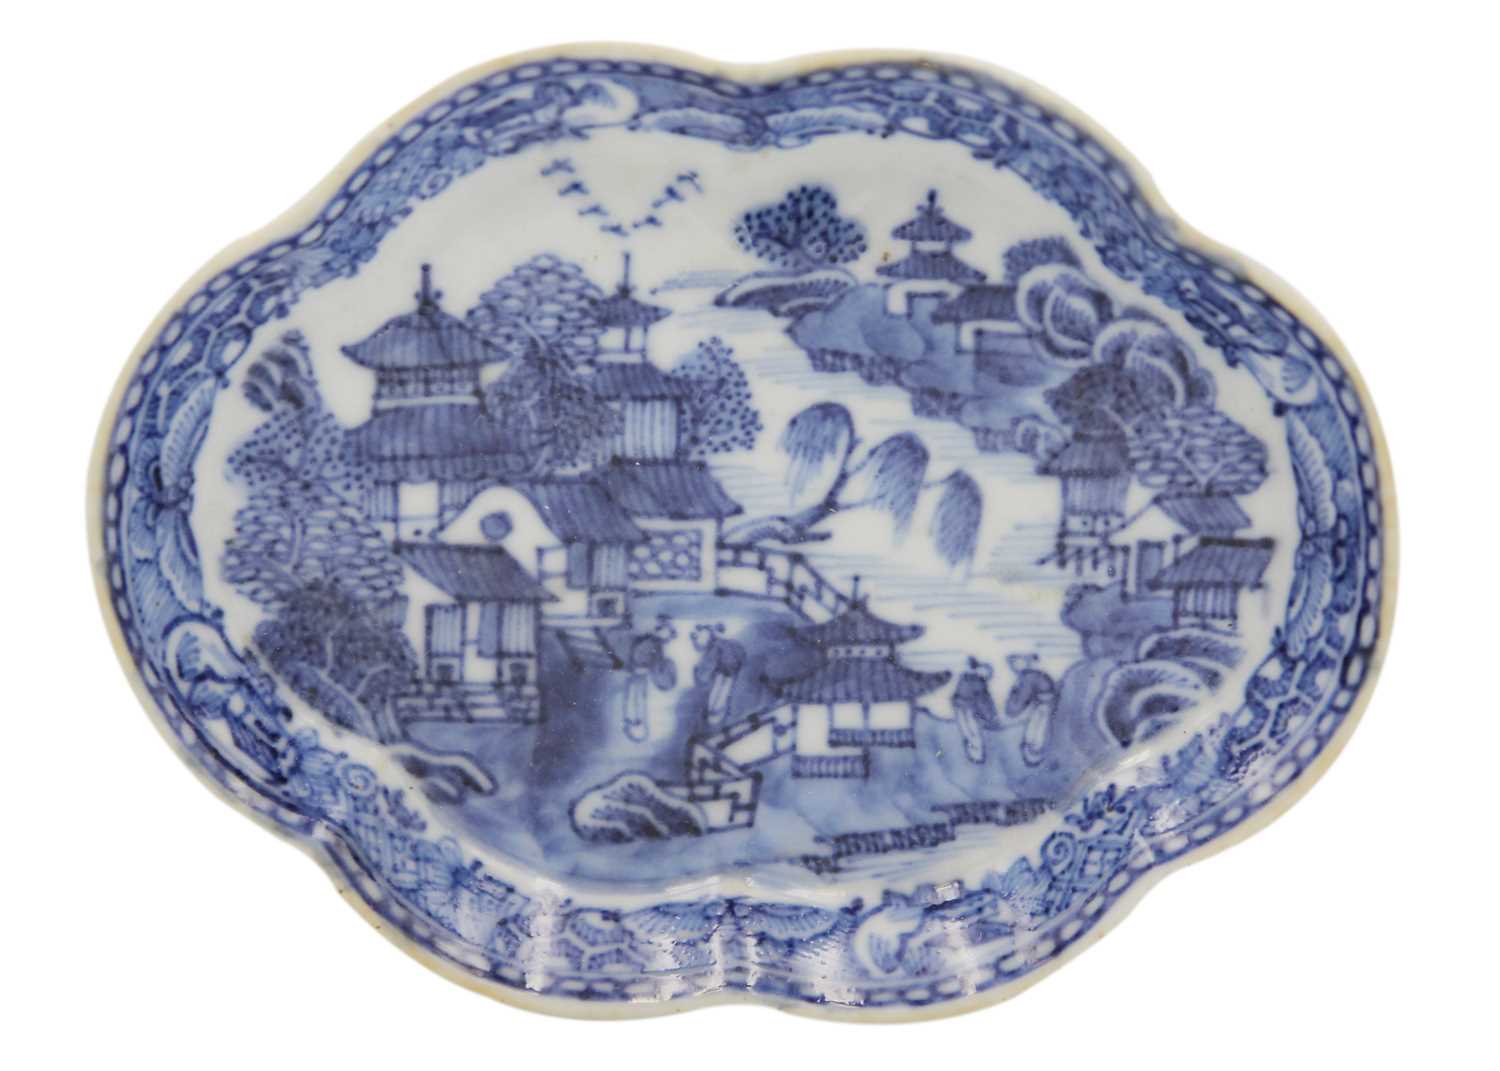 A pair of Chinese export blue and white porcelain dishes, 18th century. - Image 4 of 6